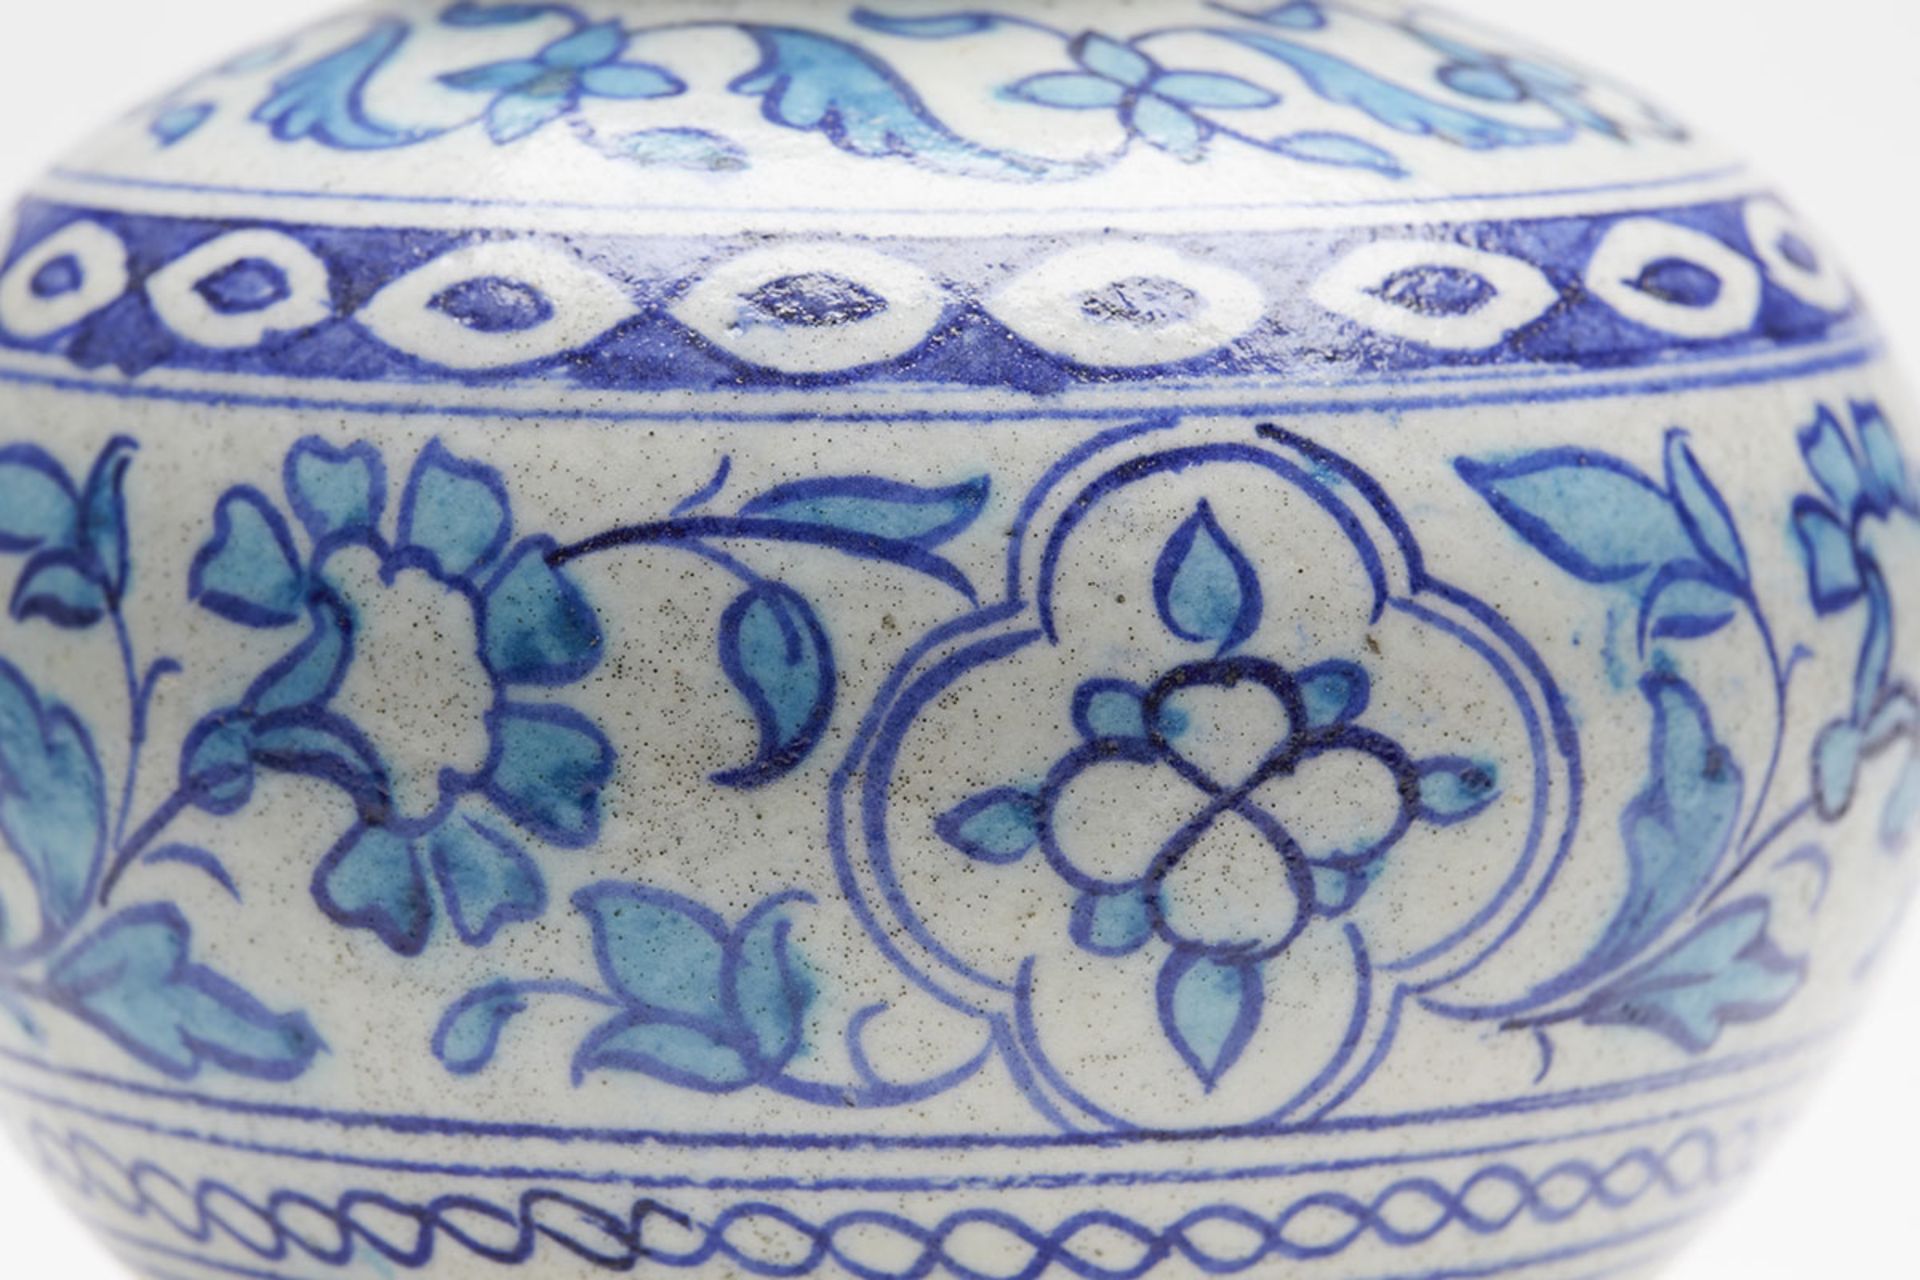 ANTIQUE MIDDLE EASTERN/INDIAN BLUE & WHITE VASE 19TH C.   DIMENSIONS   Height 13,5cm, Diameter 14, - Image 2 of 9